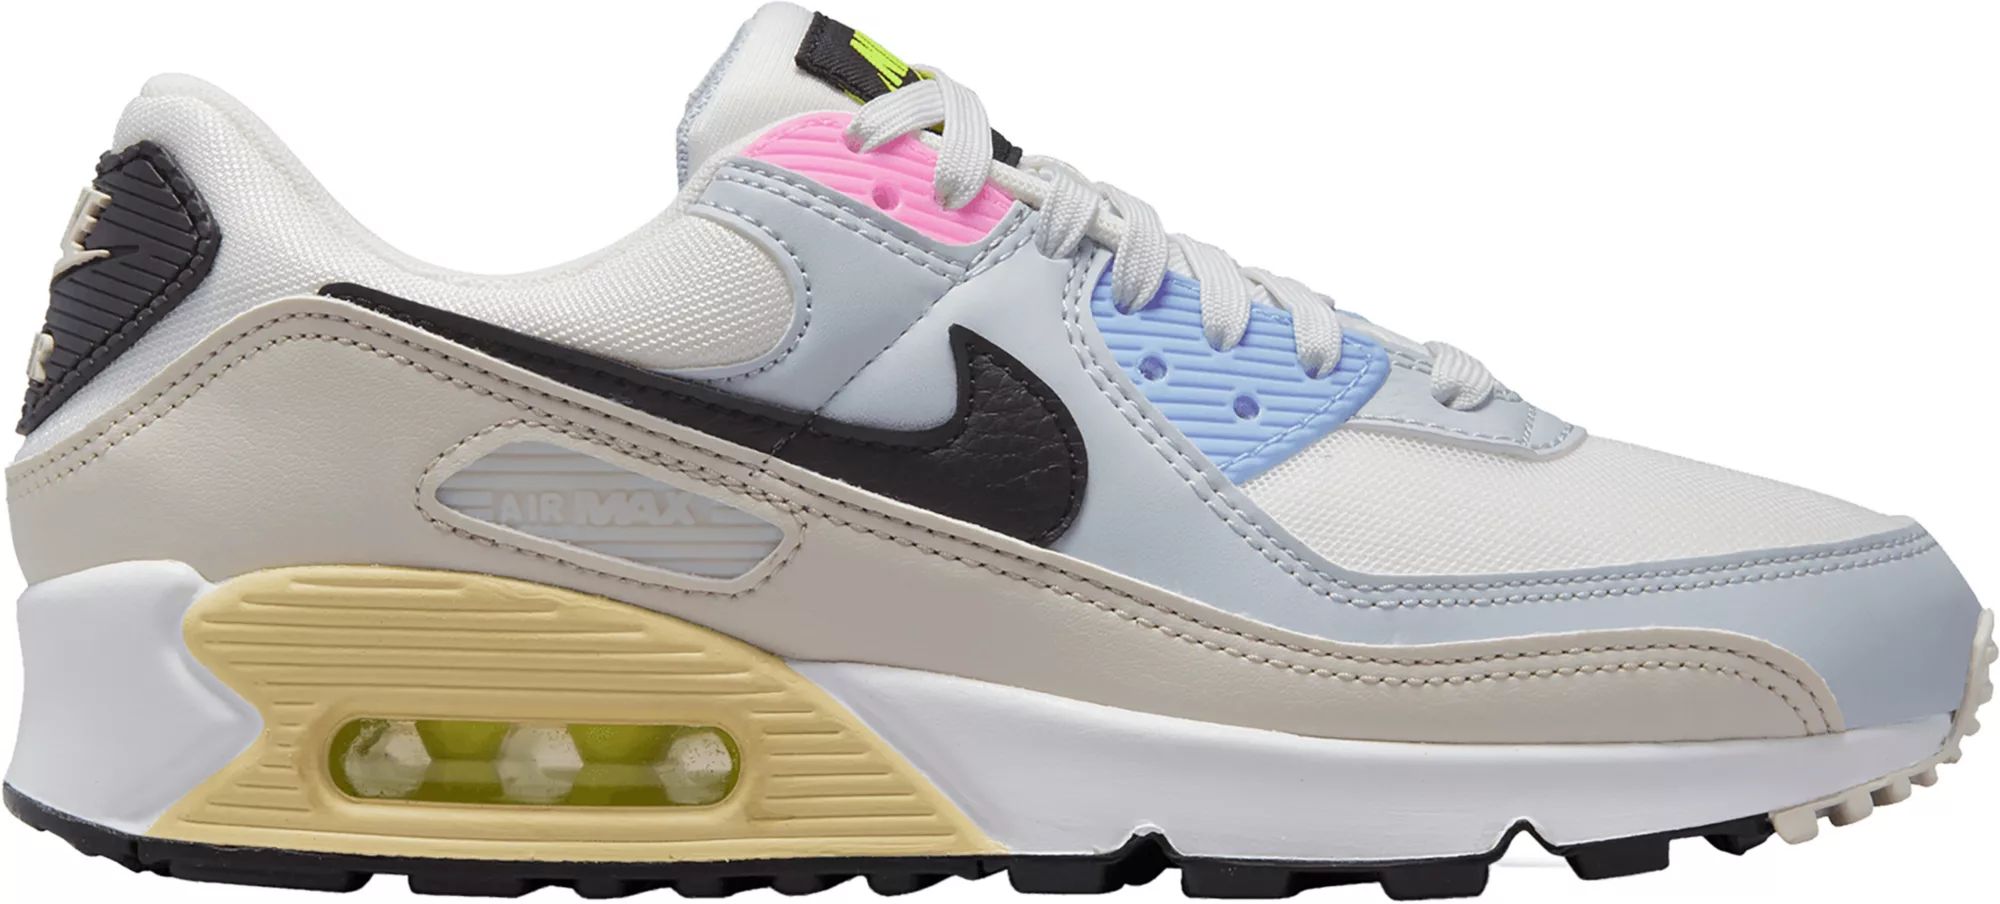 Nike Women's Air Max 90 Shoes, Size 9, Summit White/Lt Bone/Blk | Back to School | Dick's Sporting Goods